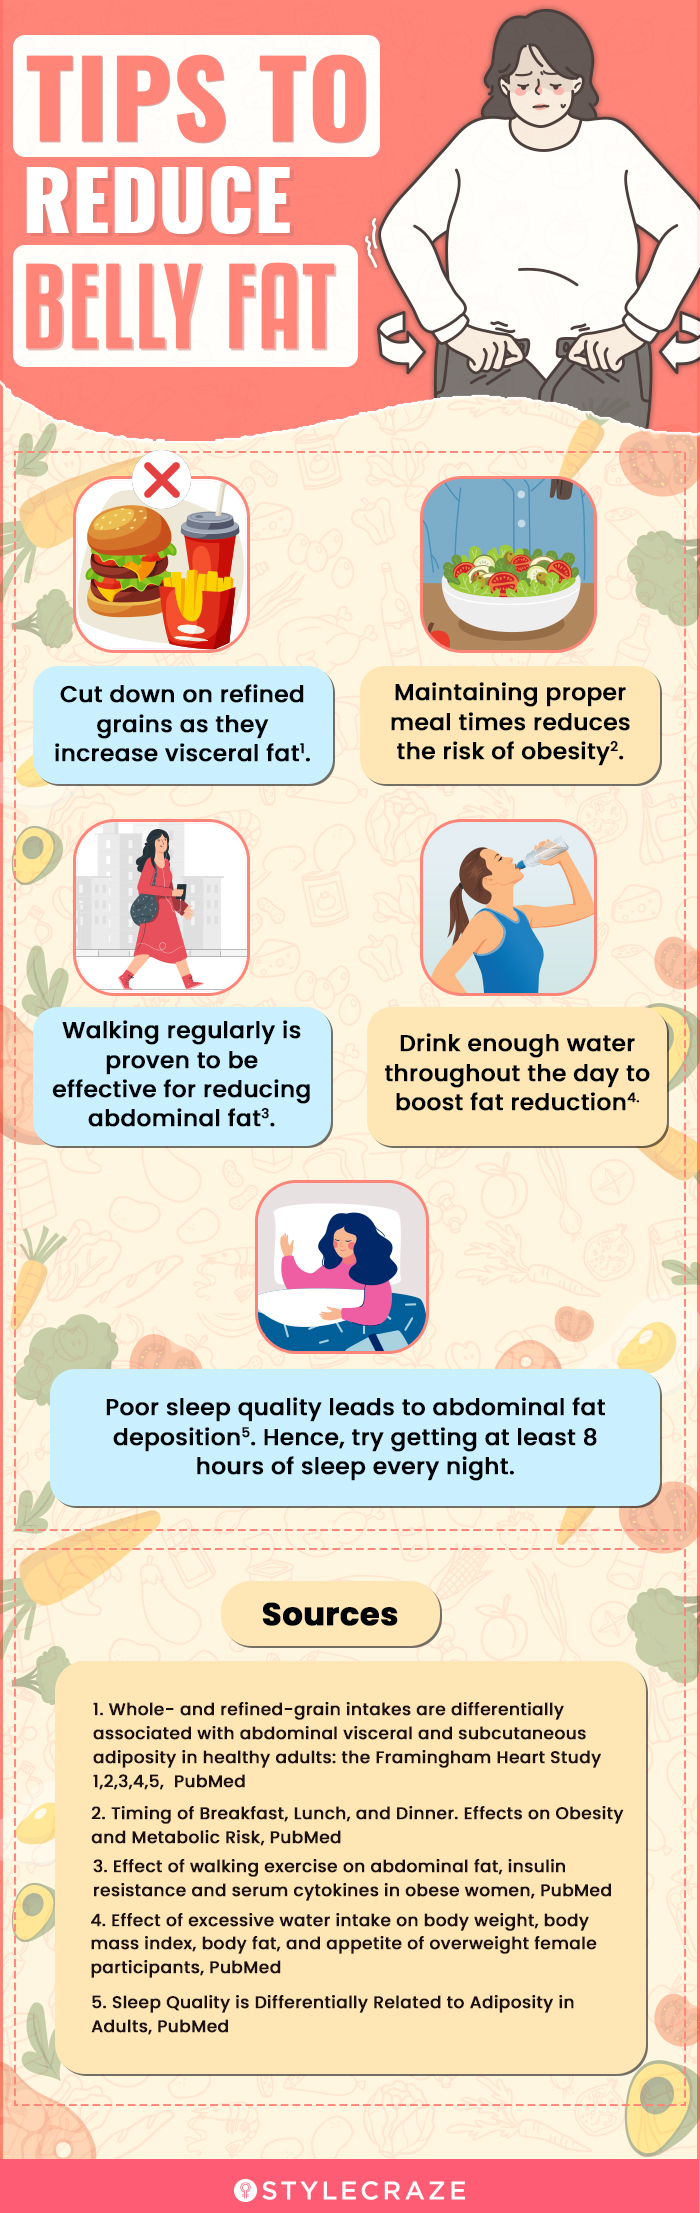 tips to reduce belly fat [infographic]